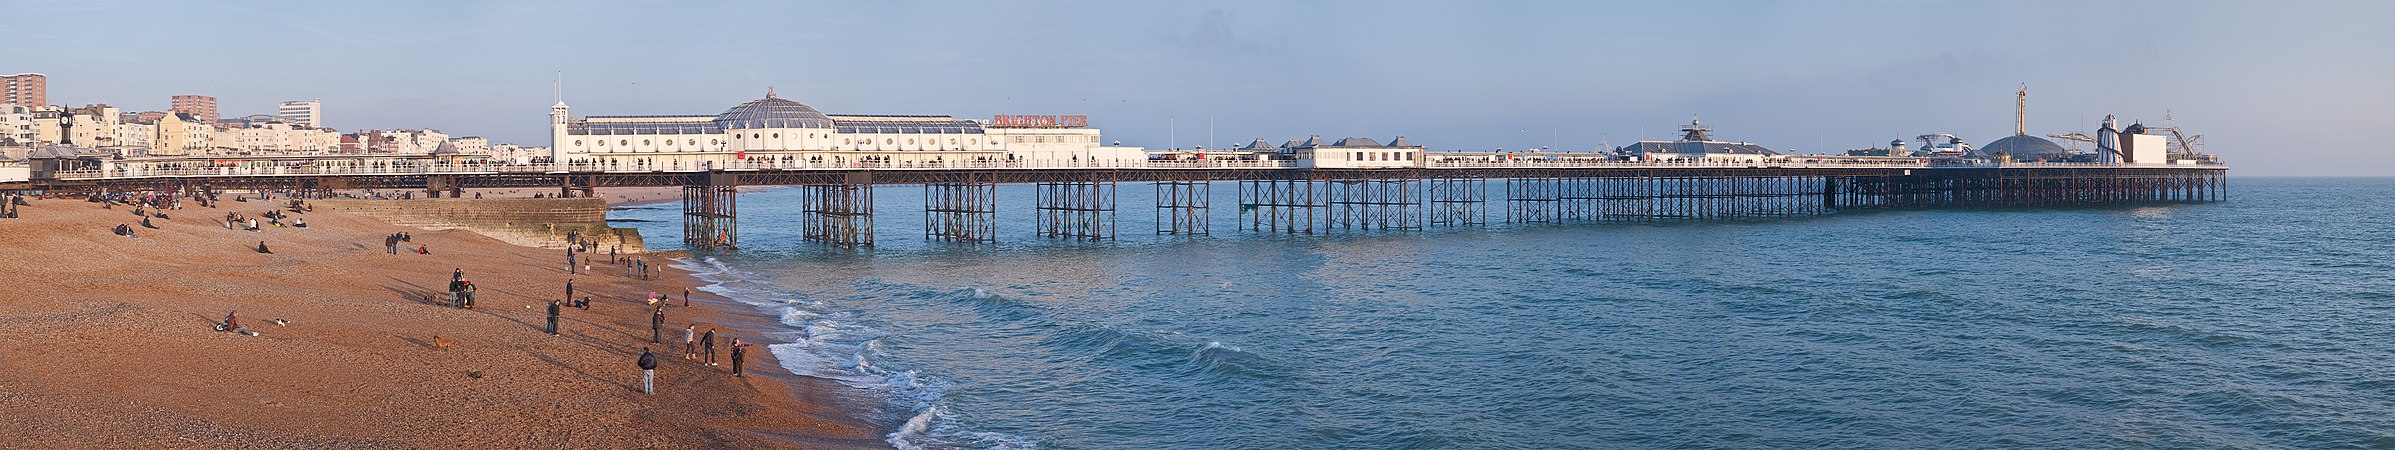 Brighton Palace Pier, by Diliff